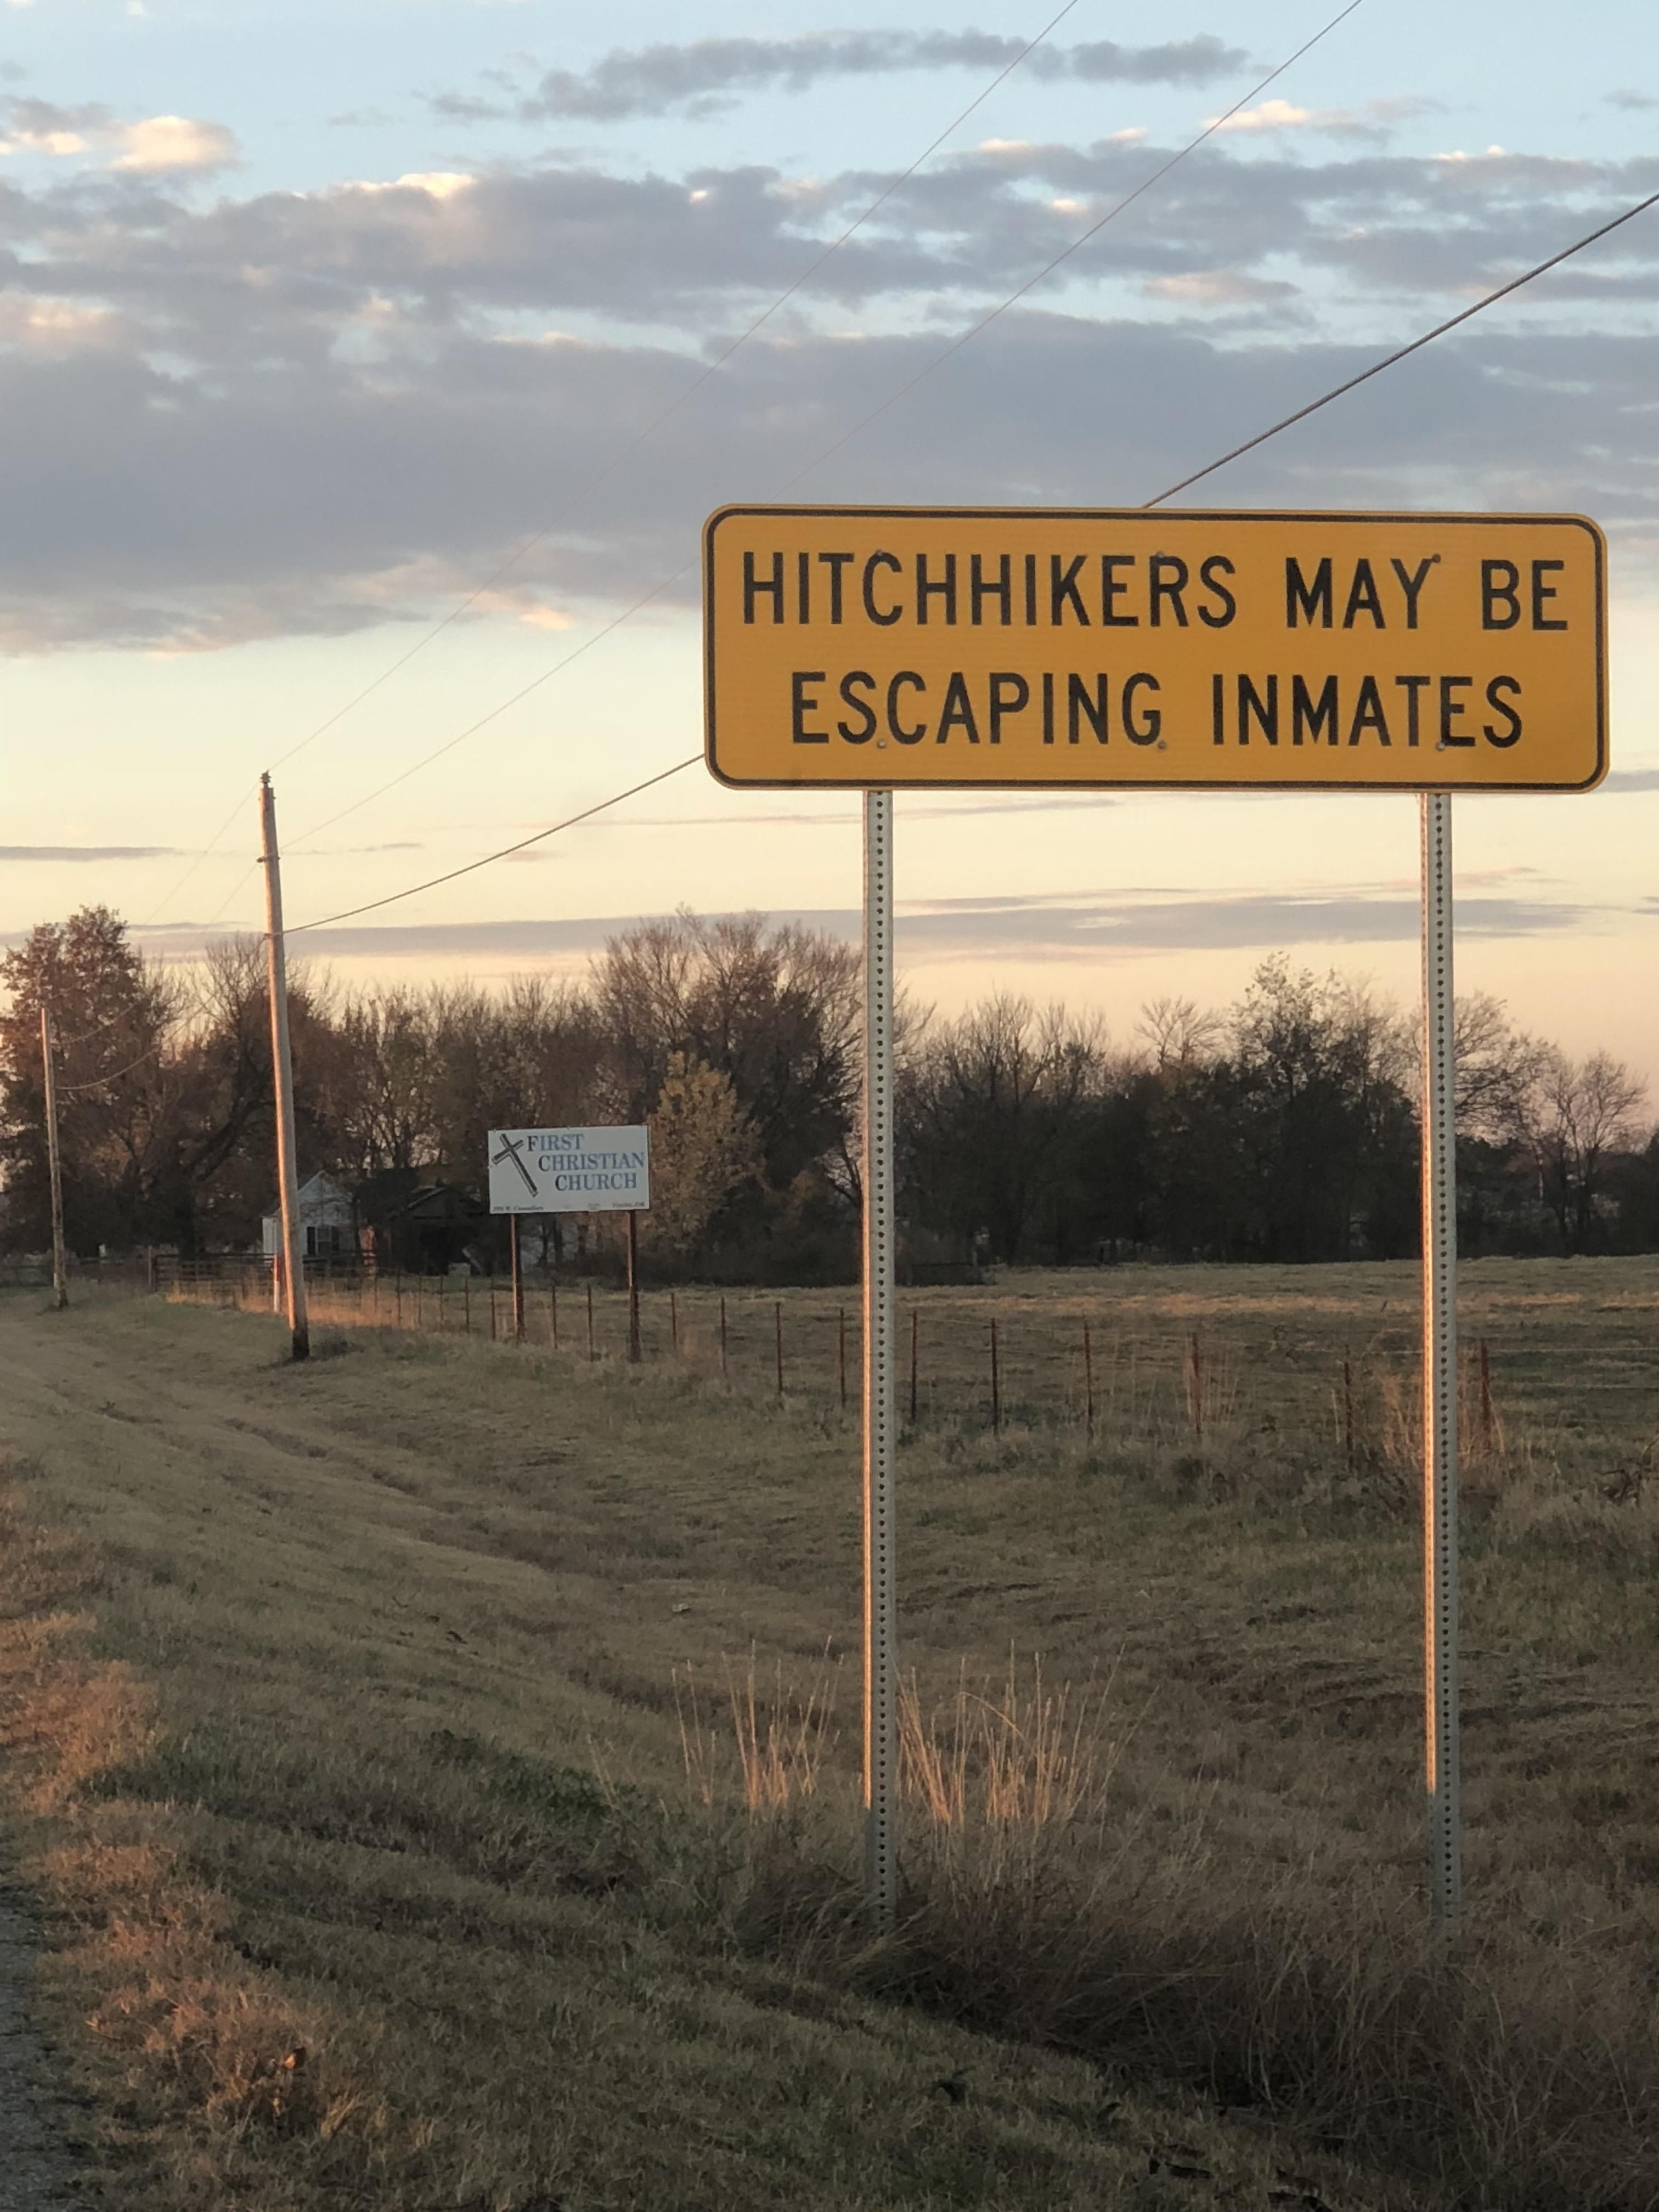 ‪“Pick up a hitchhiker, because they might be running away from a prison inmate.” ‬